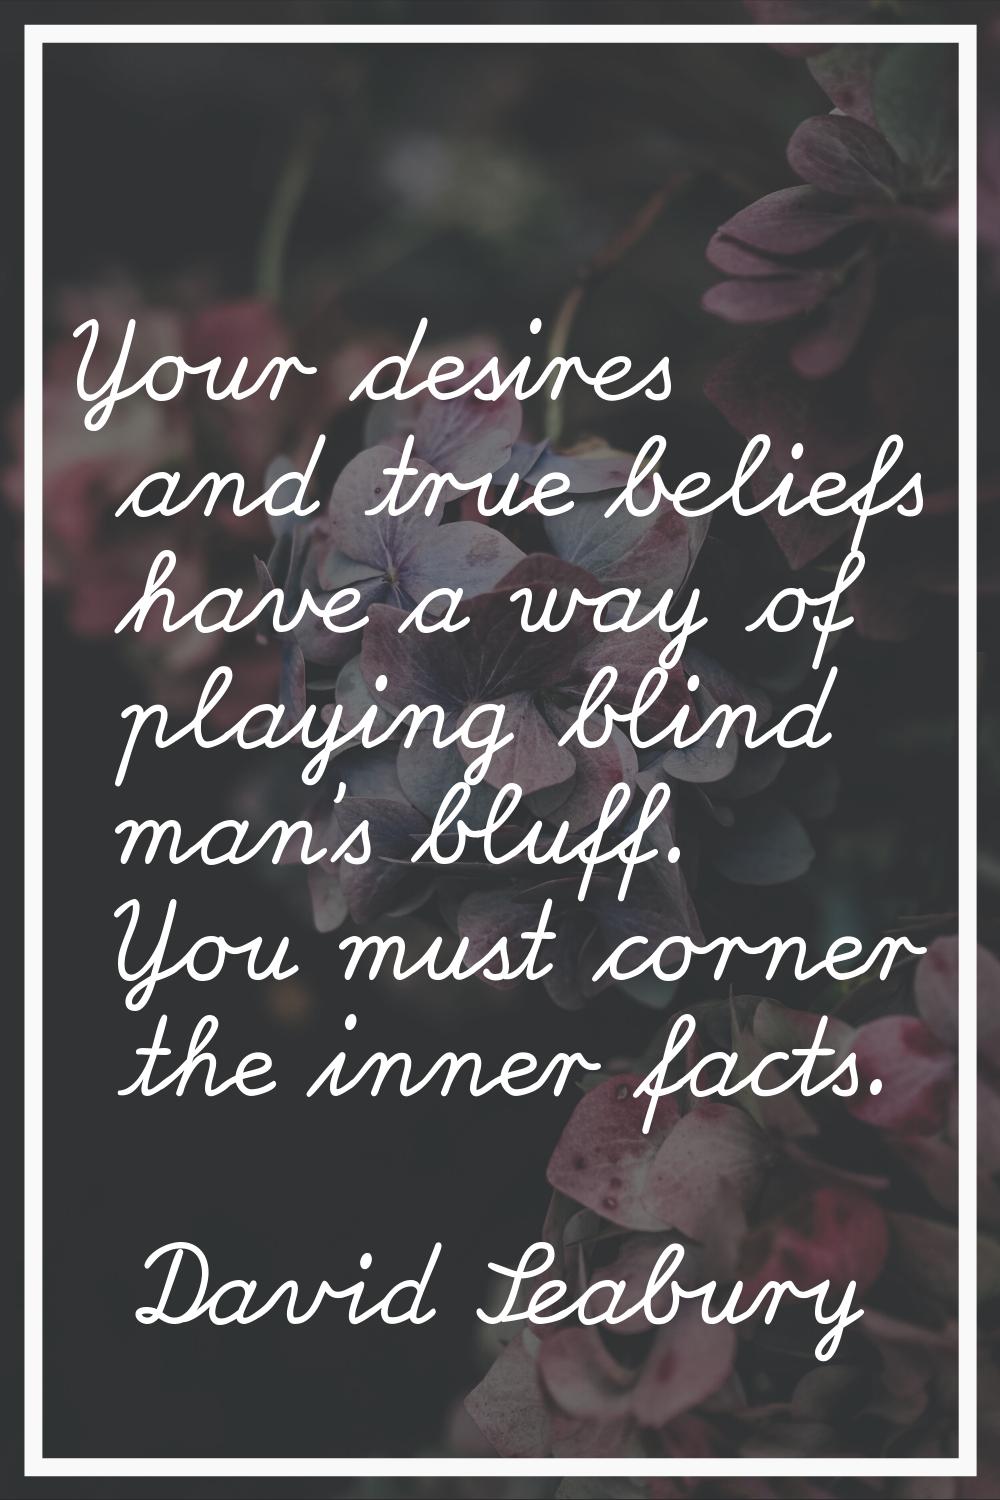 Your desires and true beliefs have a way of playing blind man's bluff. You must corner the inner fa